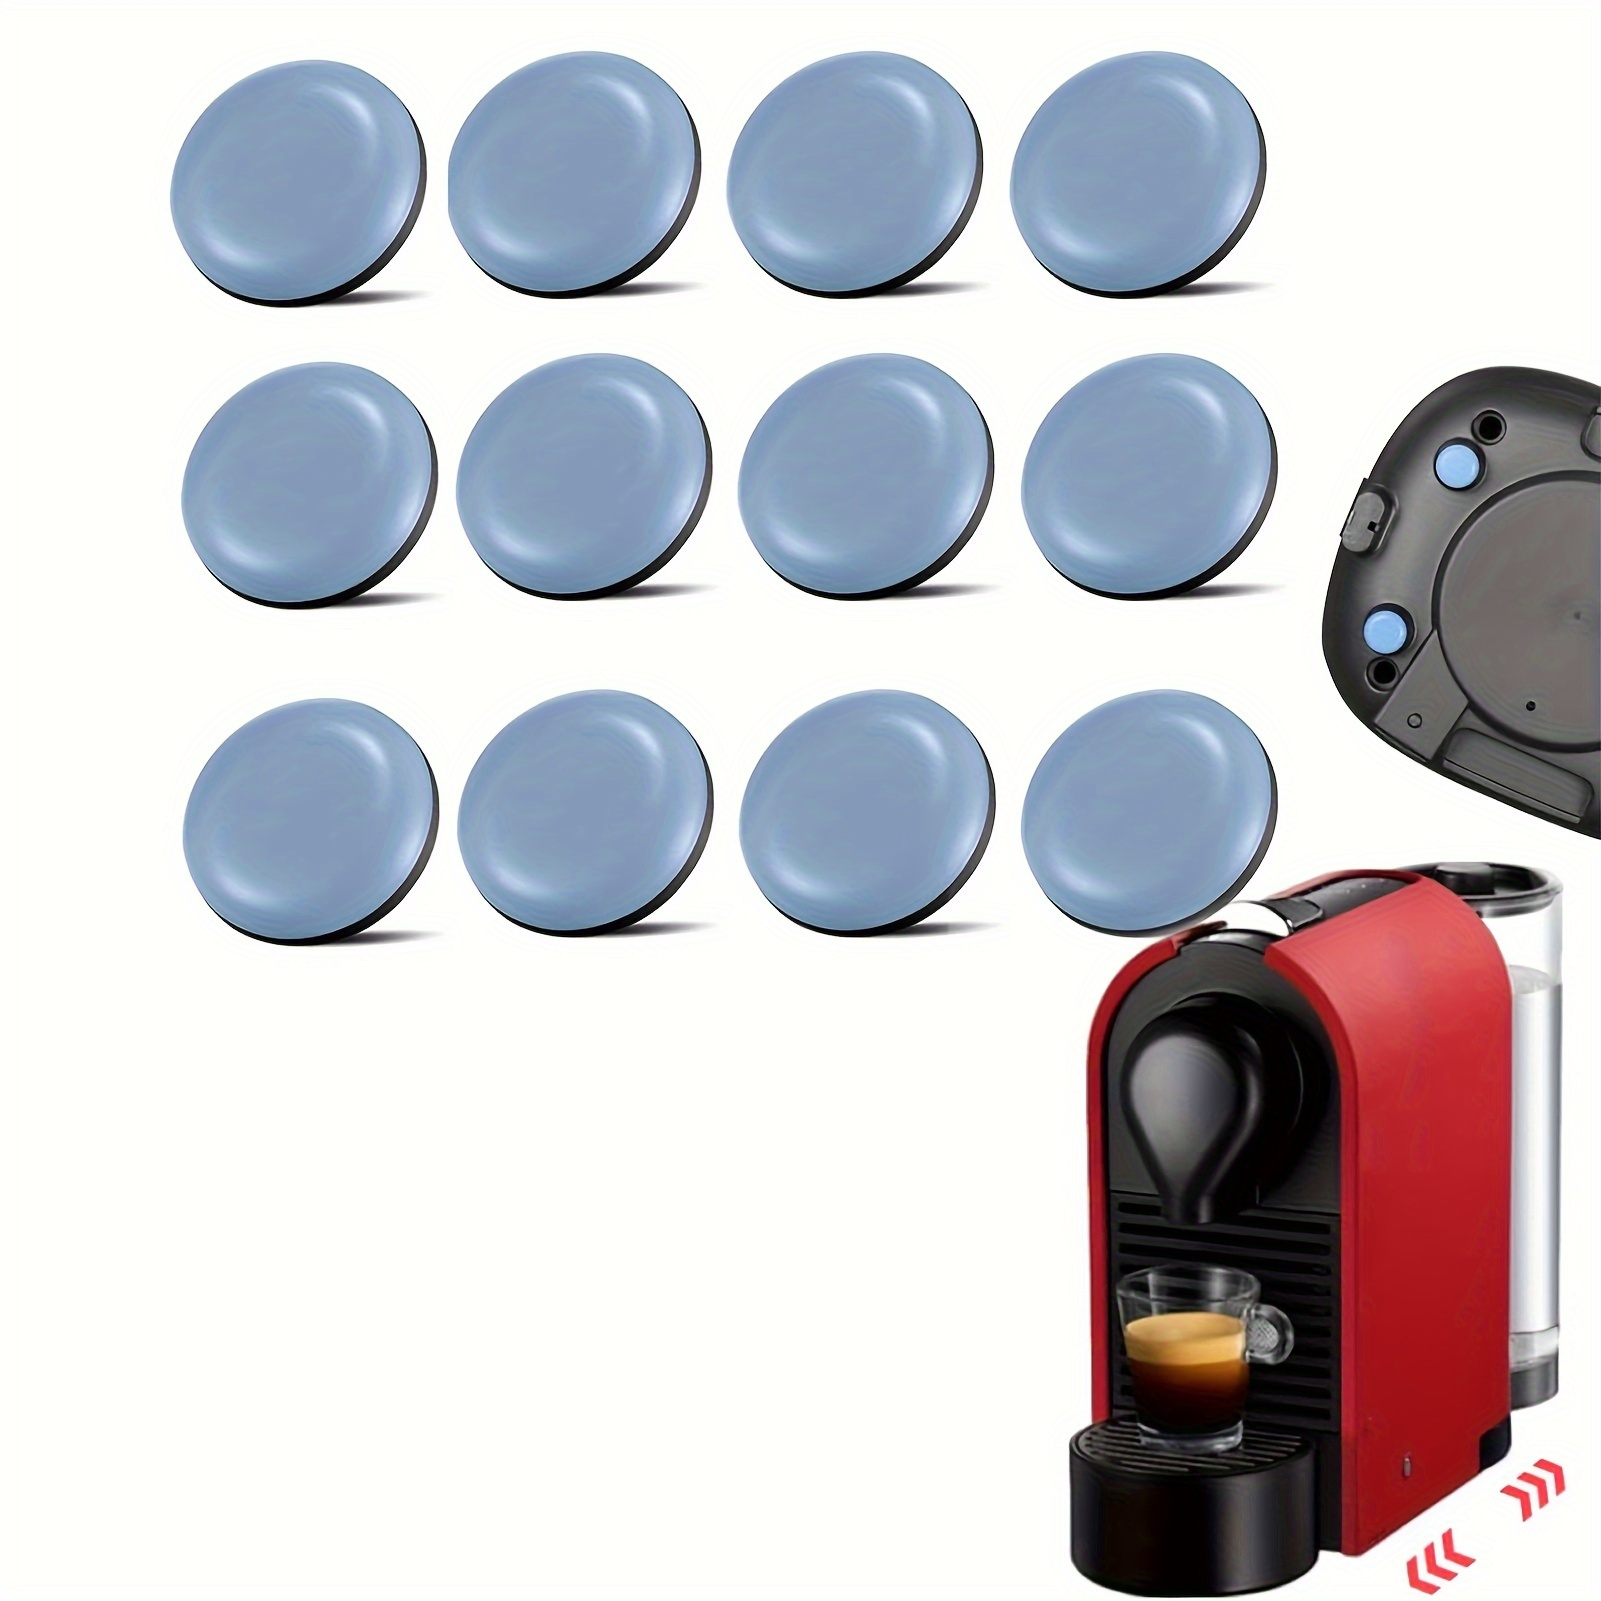 24pcs Appliance Sliders, Furniture Glides Sliders, Reusable Furniture  Movers, Self-Adhesive Small Kitchen Appliance Slider Set for Small Kitchen